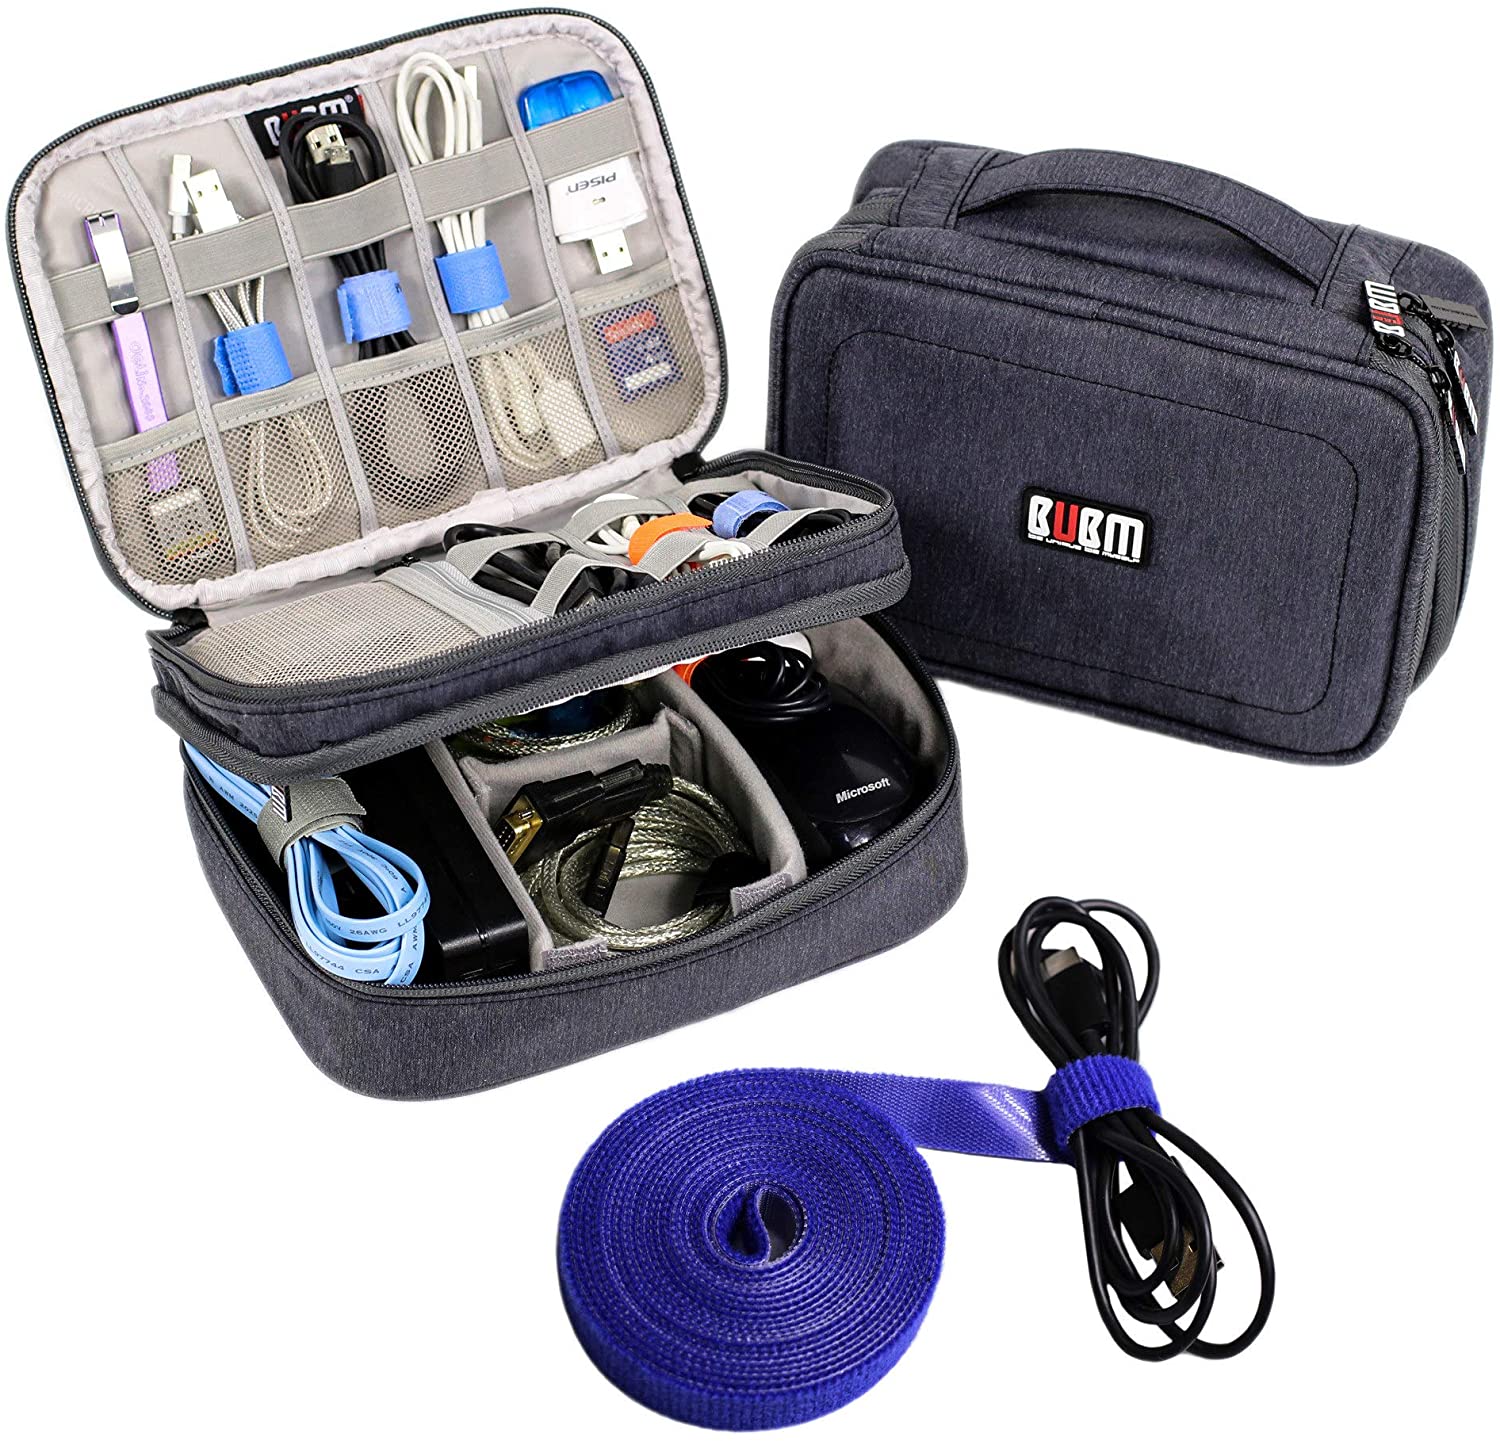 Electronics Organizer Travel Cable Cord Wire Bag Accessories Gadget Gear Storage Cases